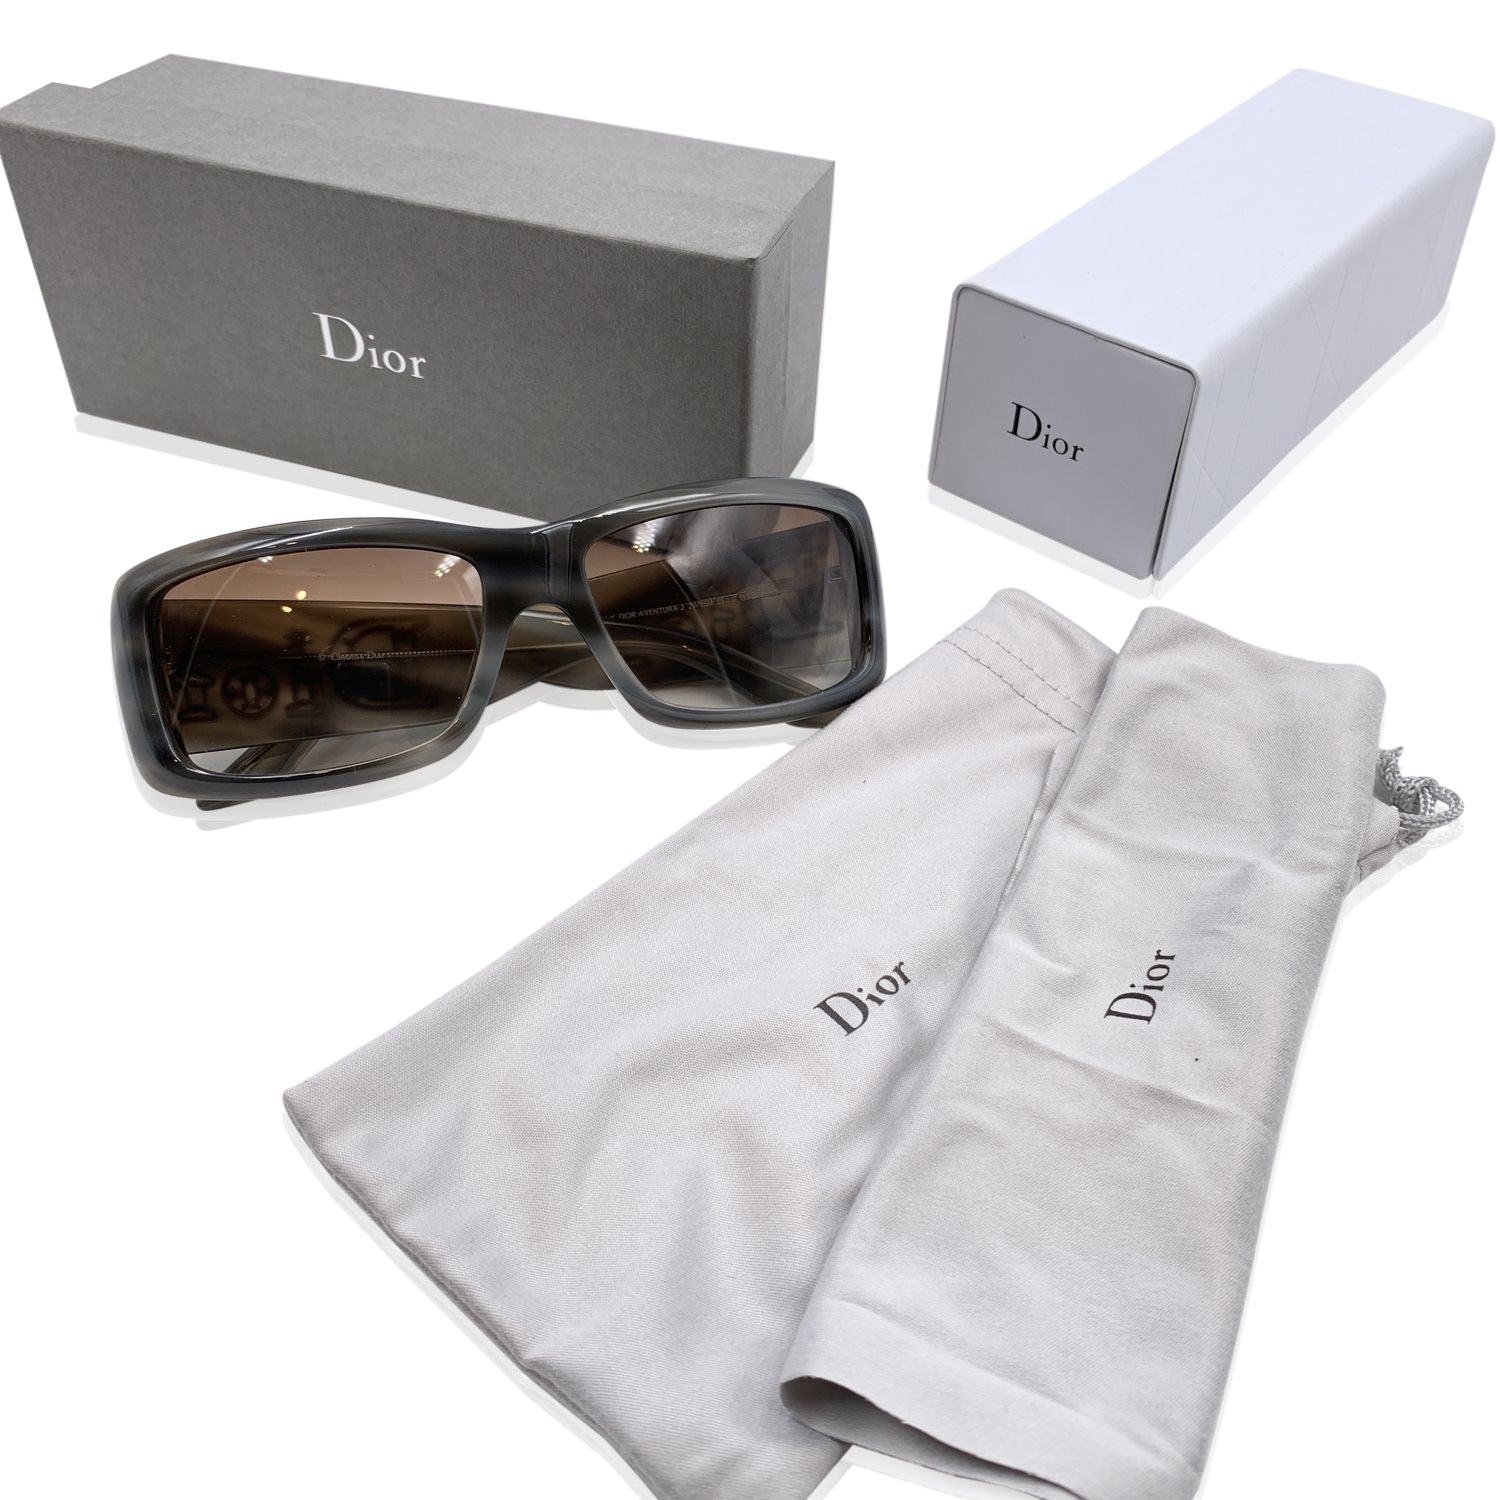 CHRISTIAN DIOR Aventura 2 Sunglasses,2W85M. Size 56/17 135mm. Grey acetate frame, sides with large silver metal Dior logos. 100% Total UVA/UVB protection gradient light brown lenses. Made in Italy. Details MATERIAL: Plastic COLOR: Grey MODEL: Dior